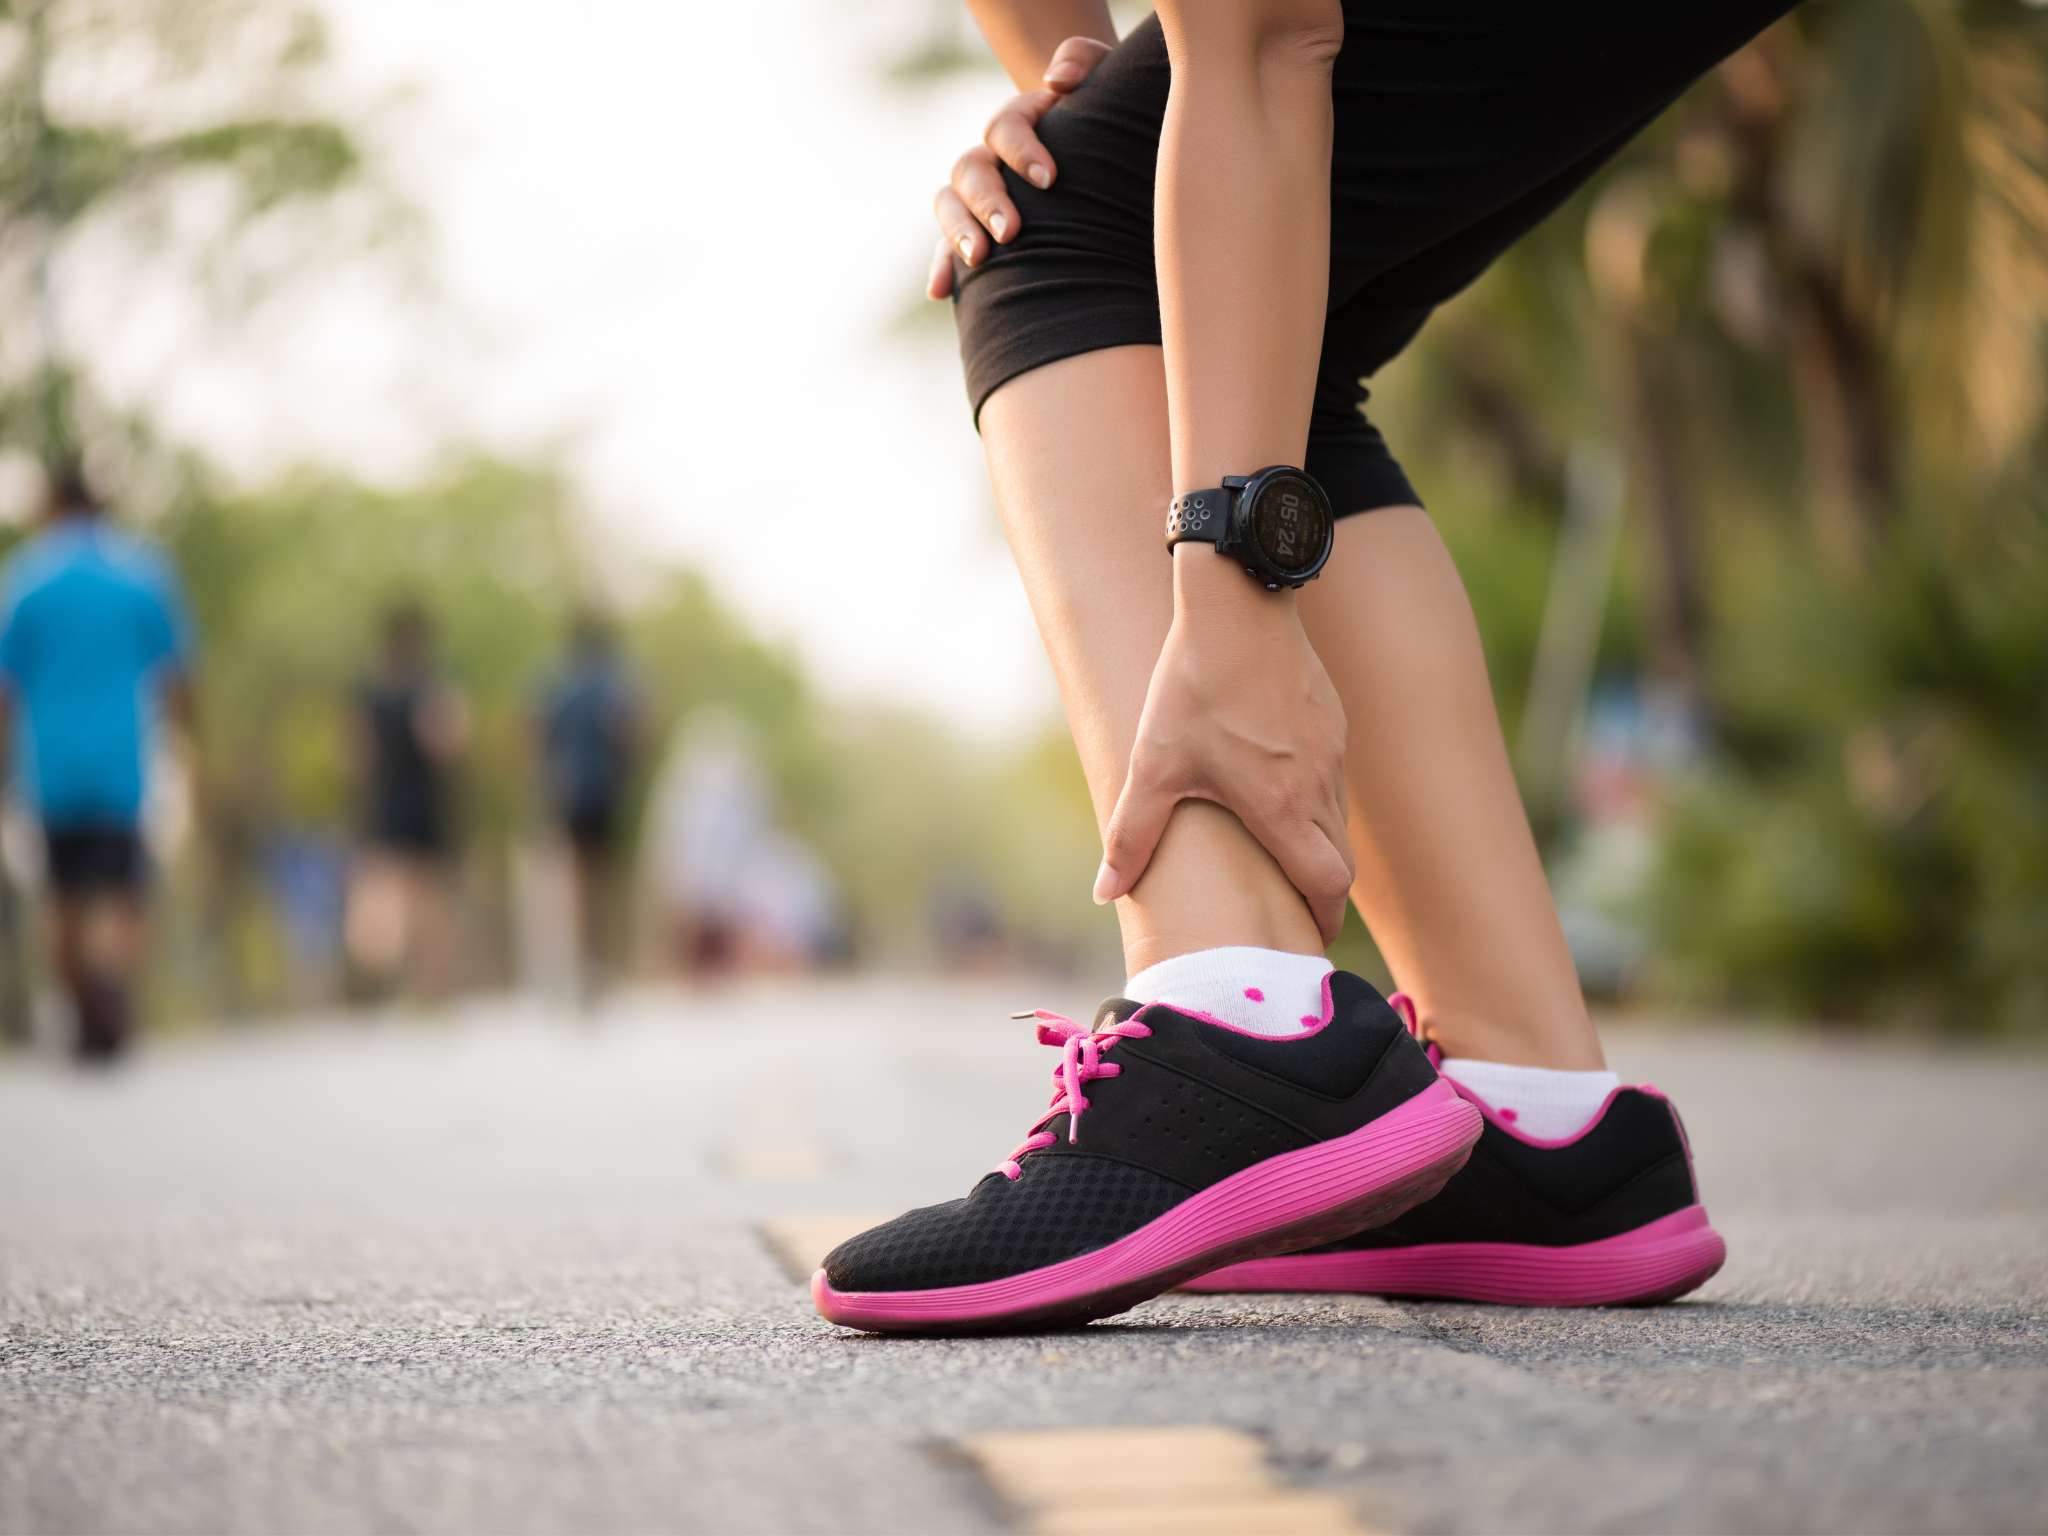 Woman suffering from an ankle injury while exercising. Running sport injury concept.